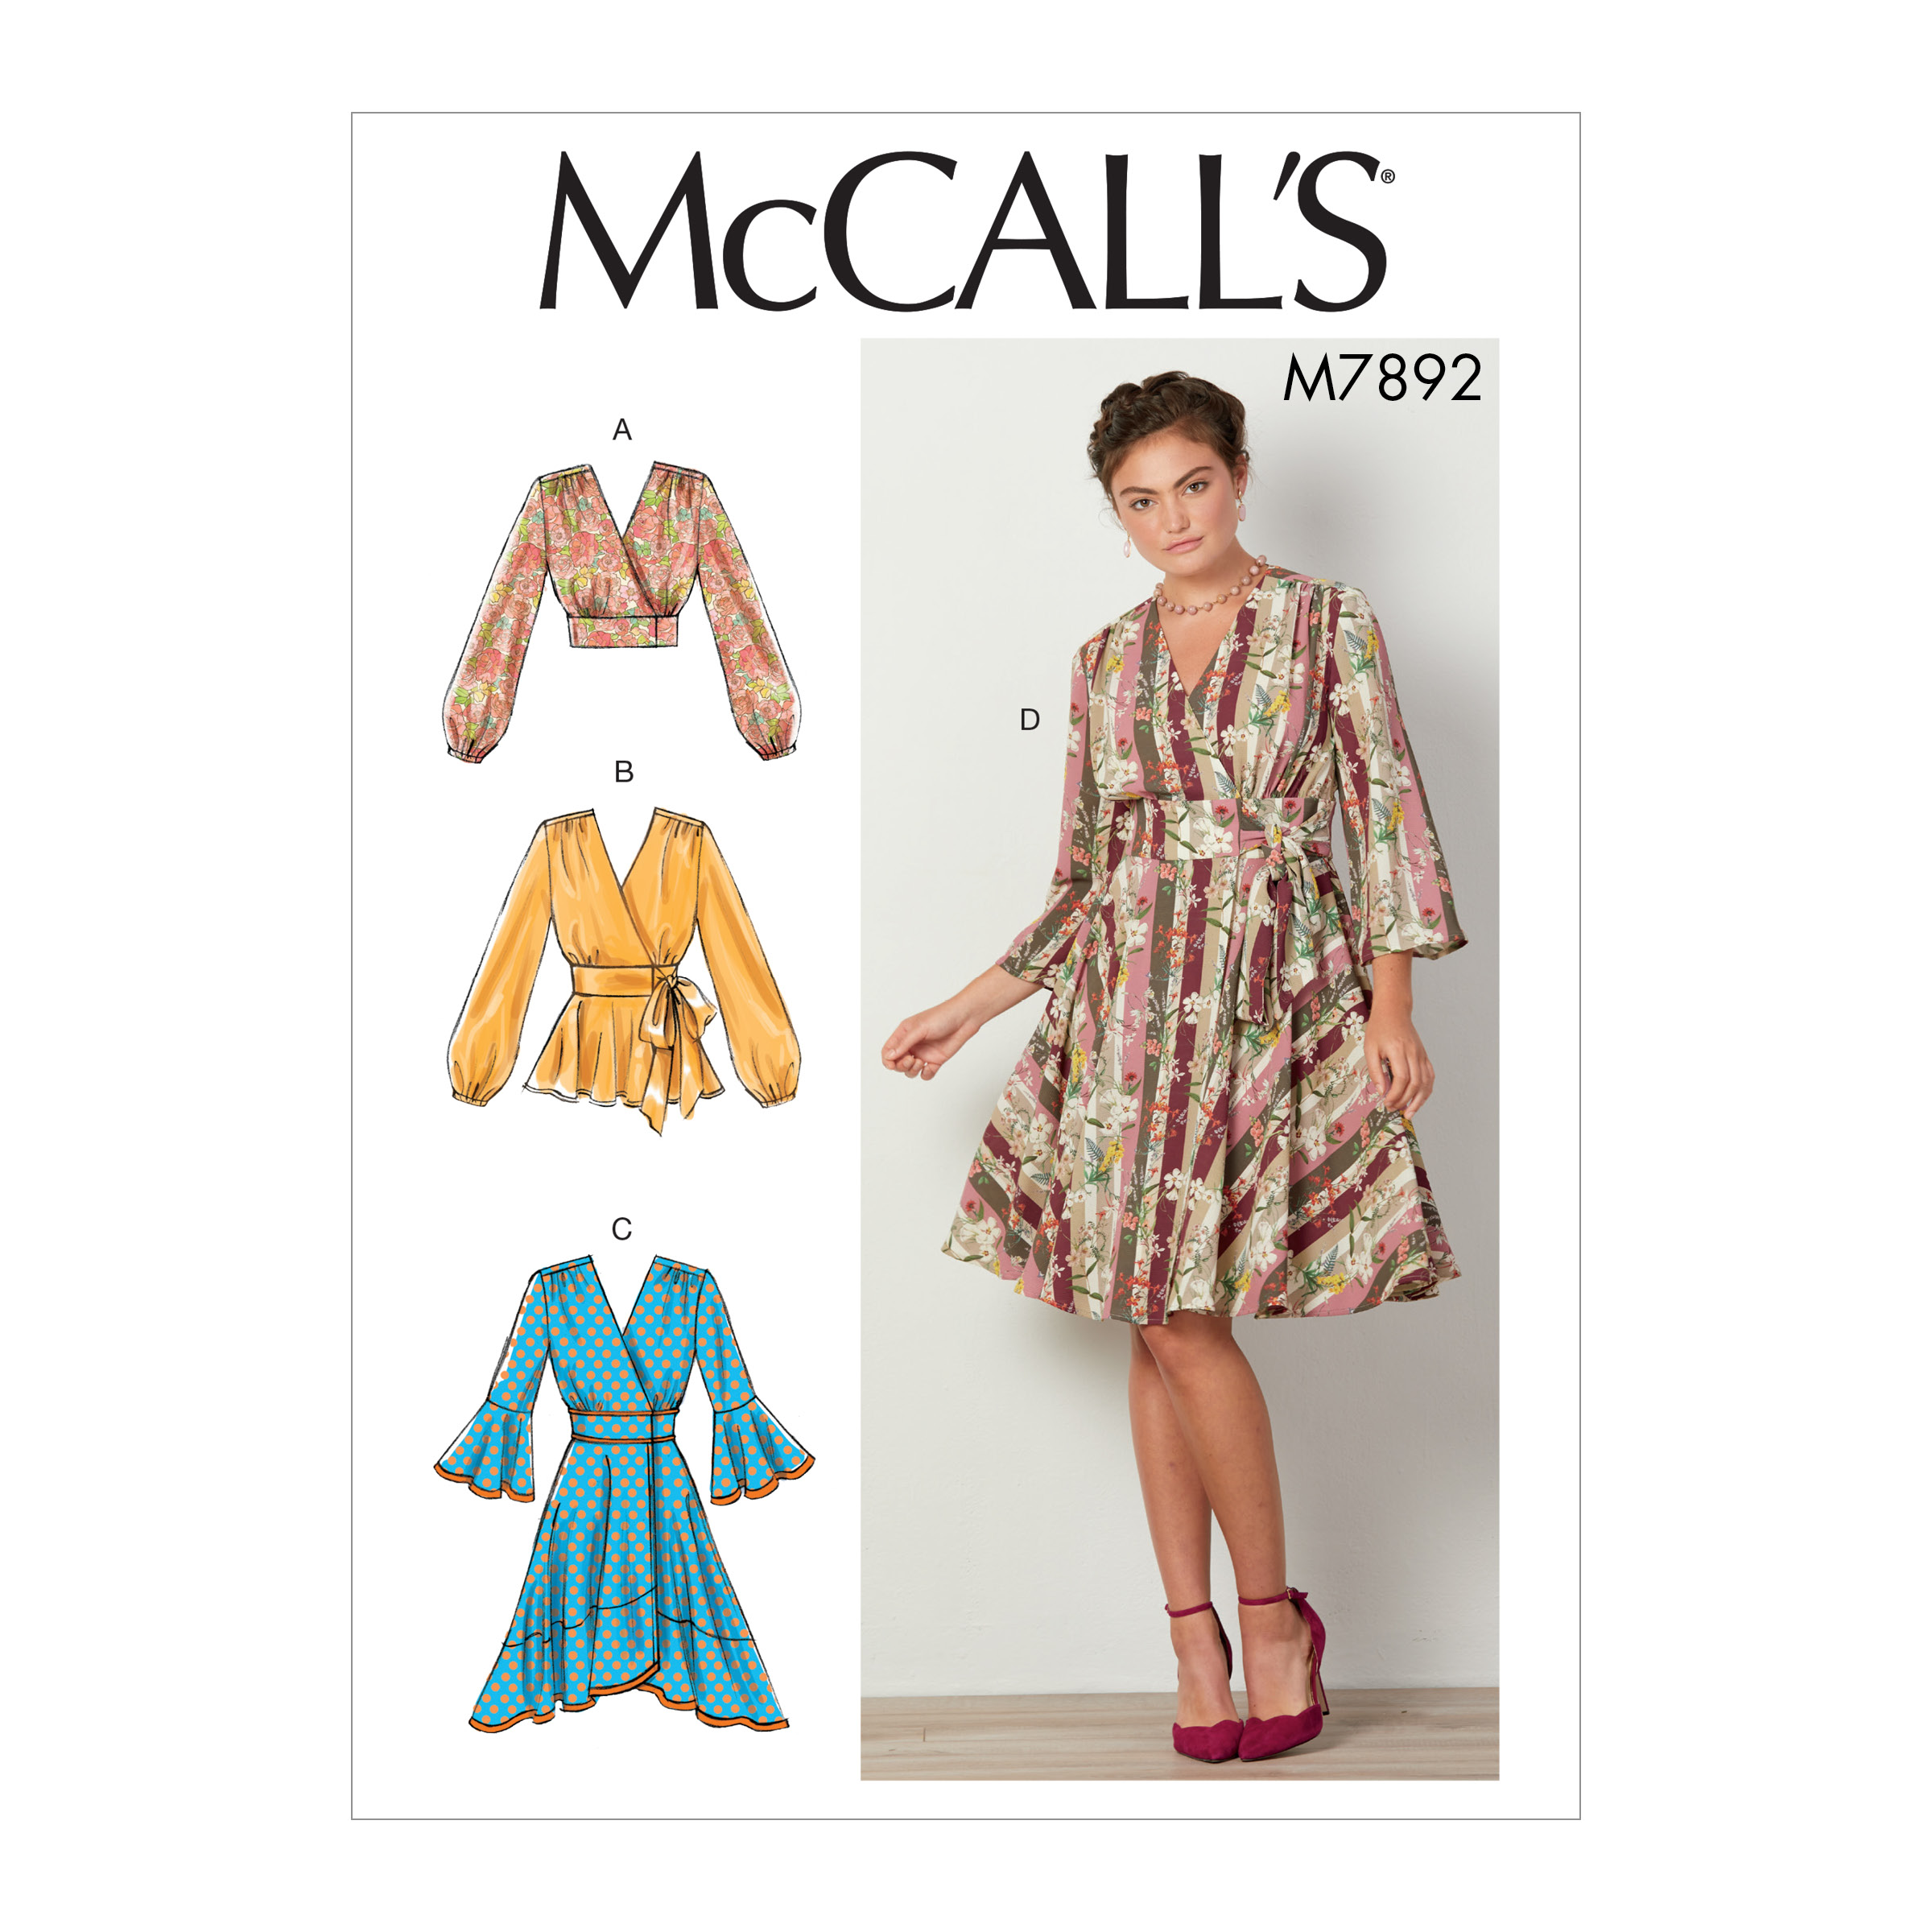 https://images.patternreview.com/sewing/patterns/mccall/2018/7892/7892.jpg